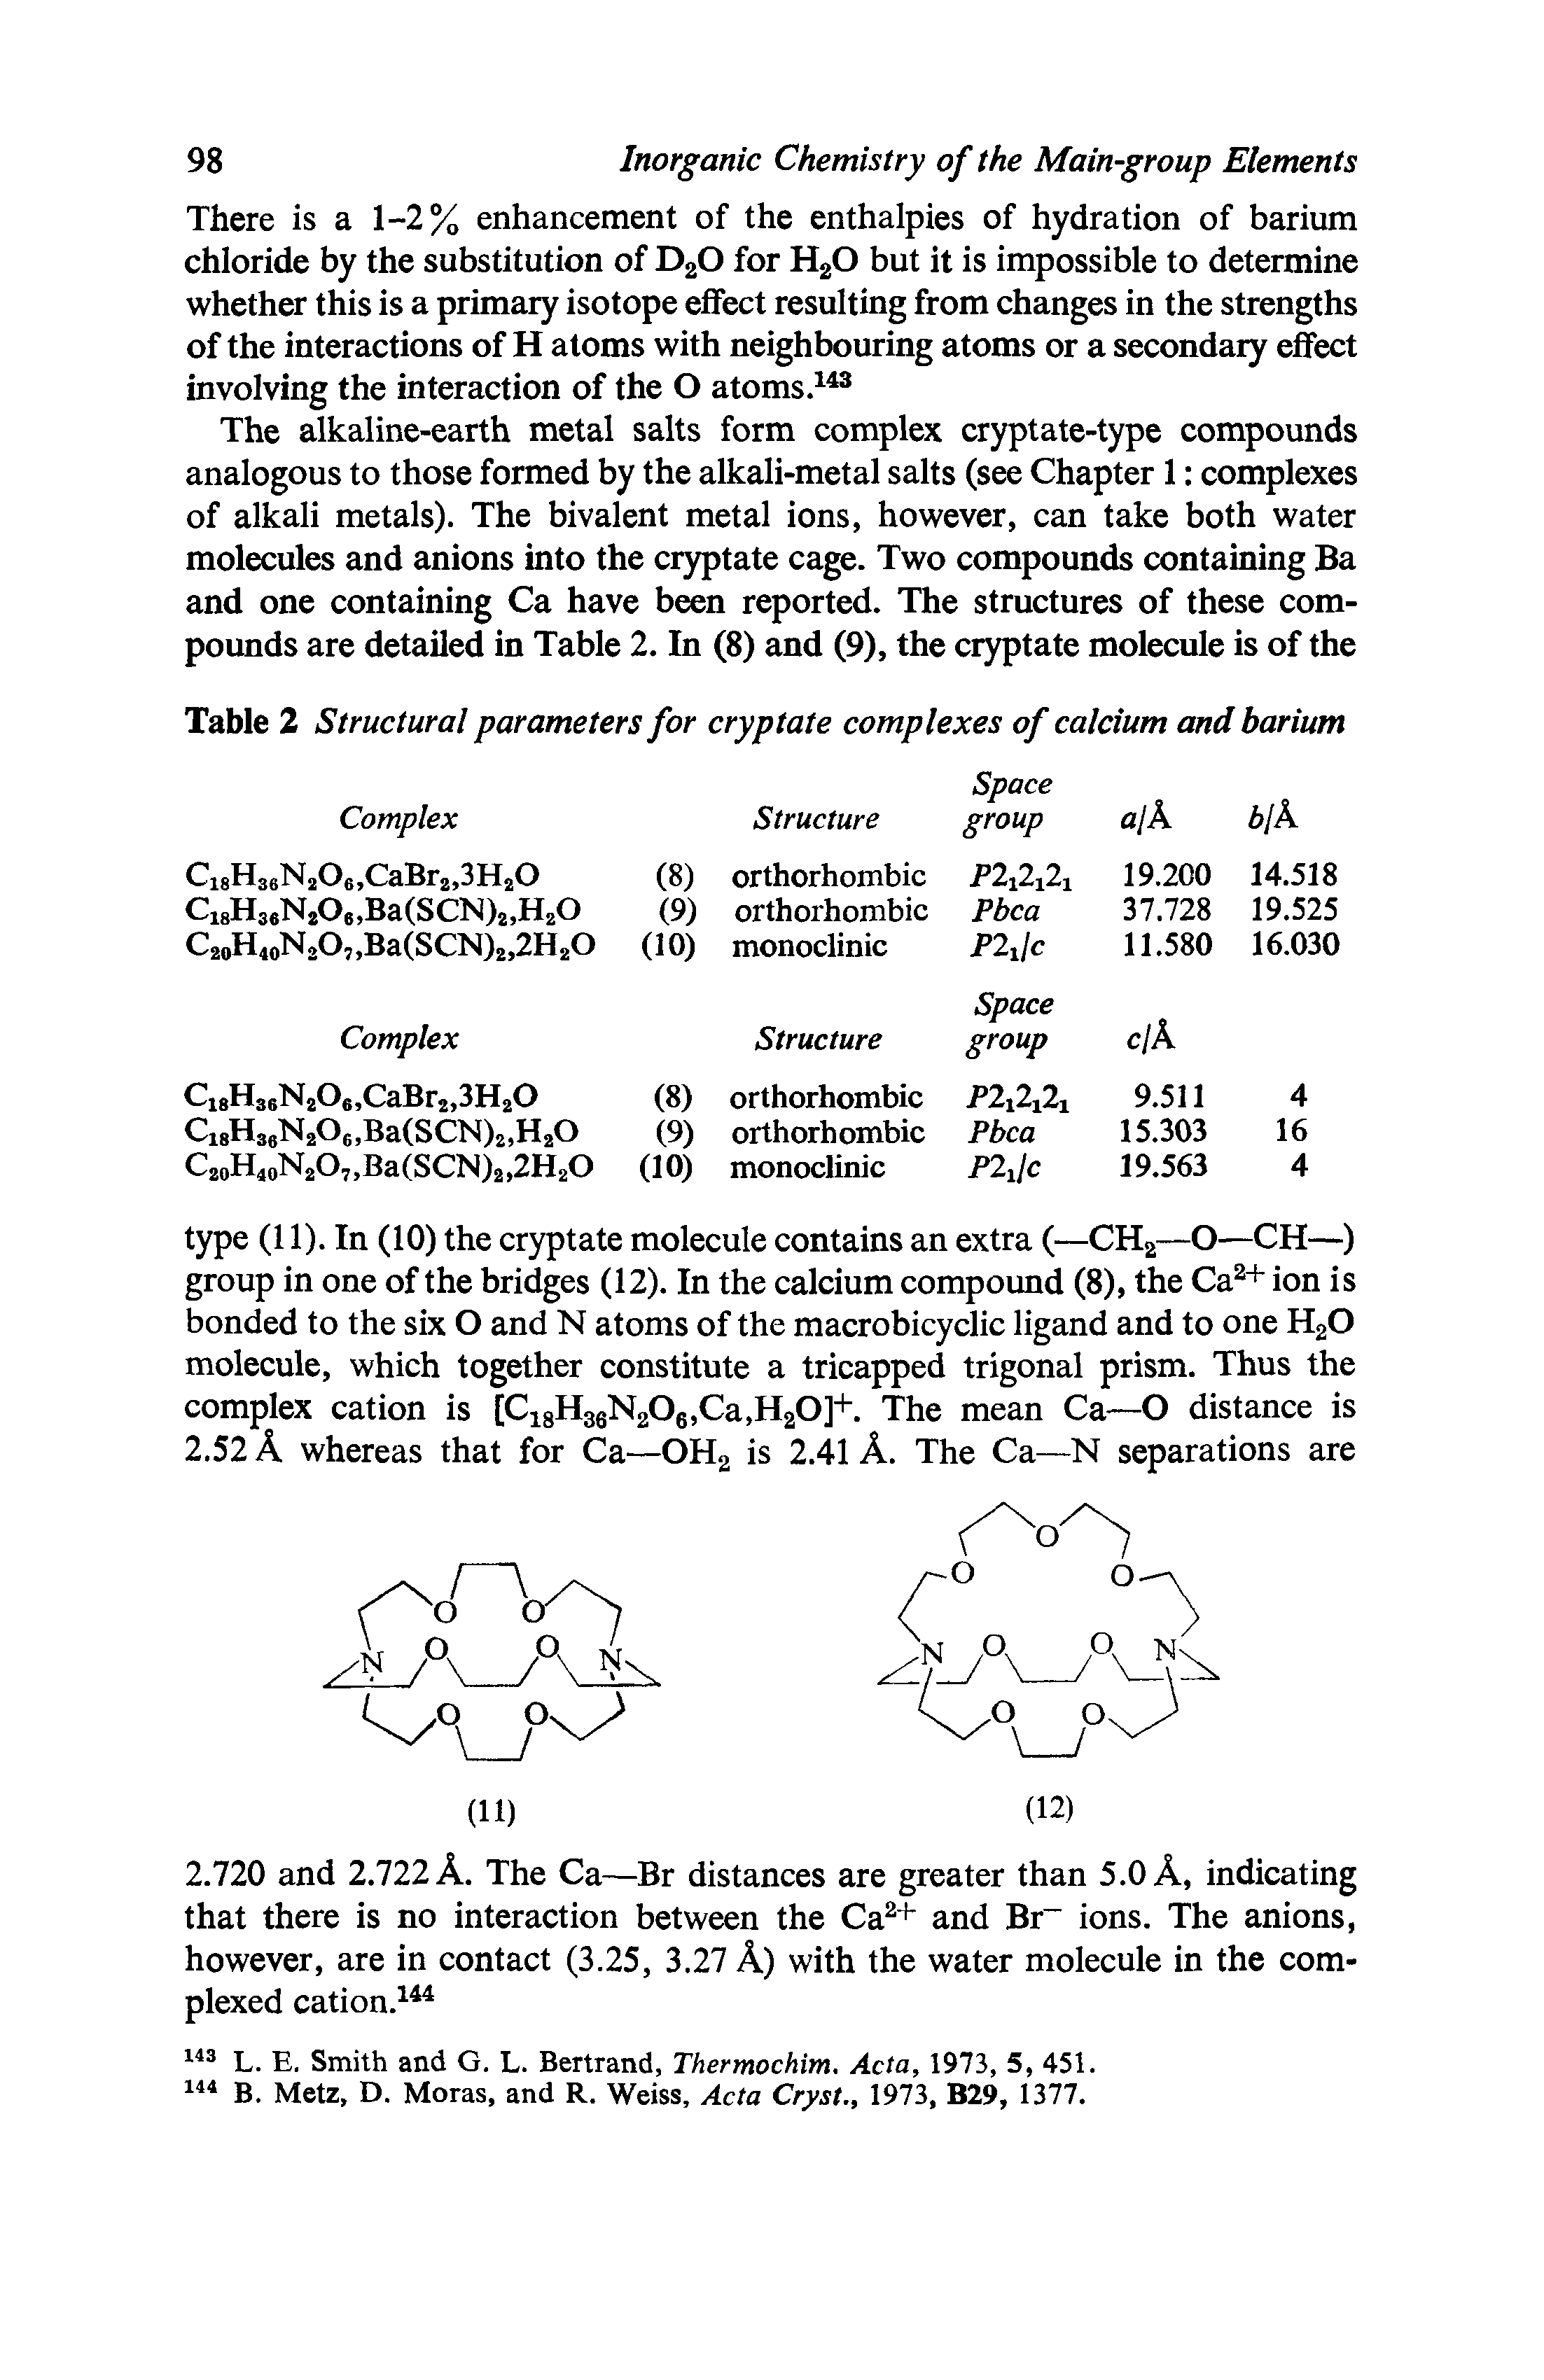 Table 2 Structural parameters for cryptate complexes of calcium and barium...